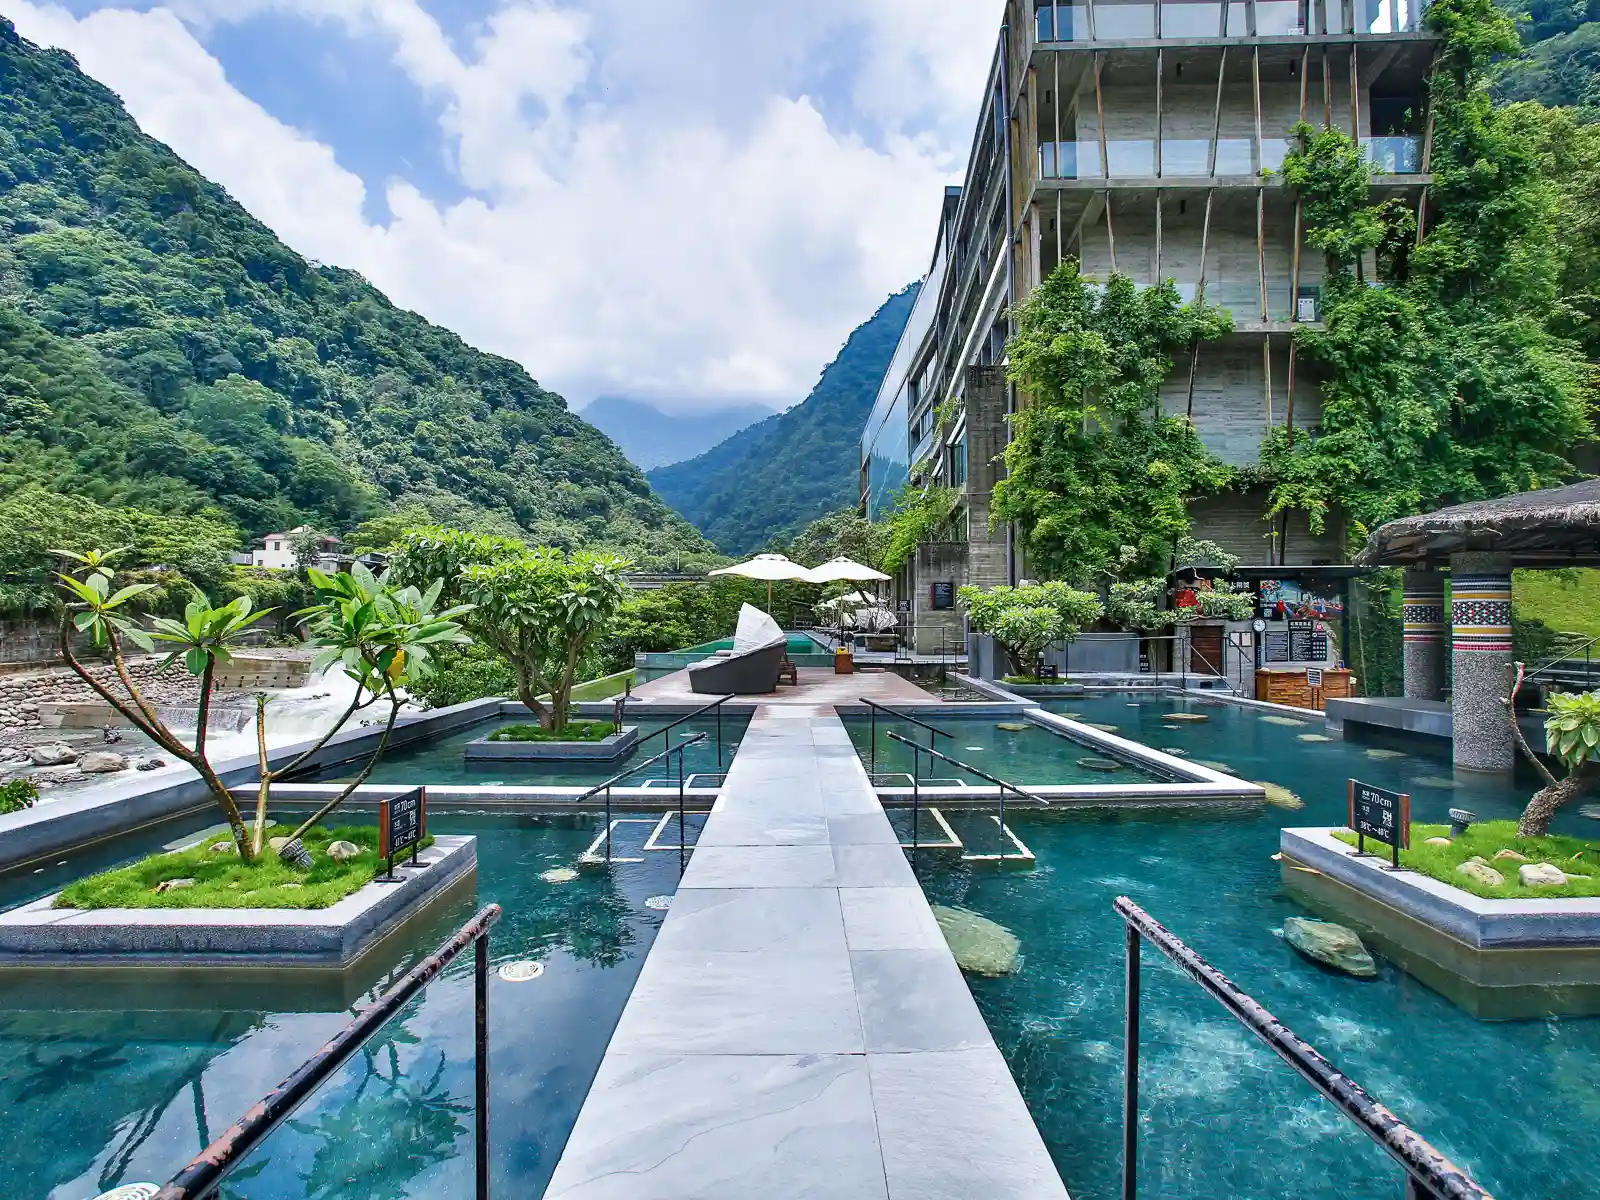 Multiple pools can be seen in the garden-like outdoor bathing complex of Onsen Papawaqa.